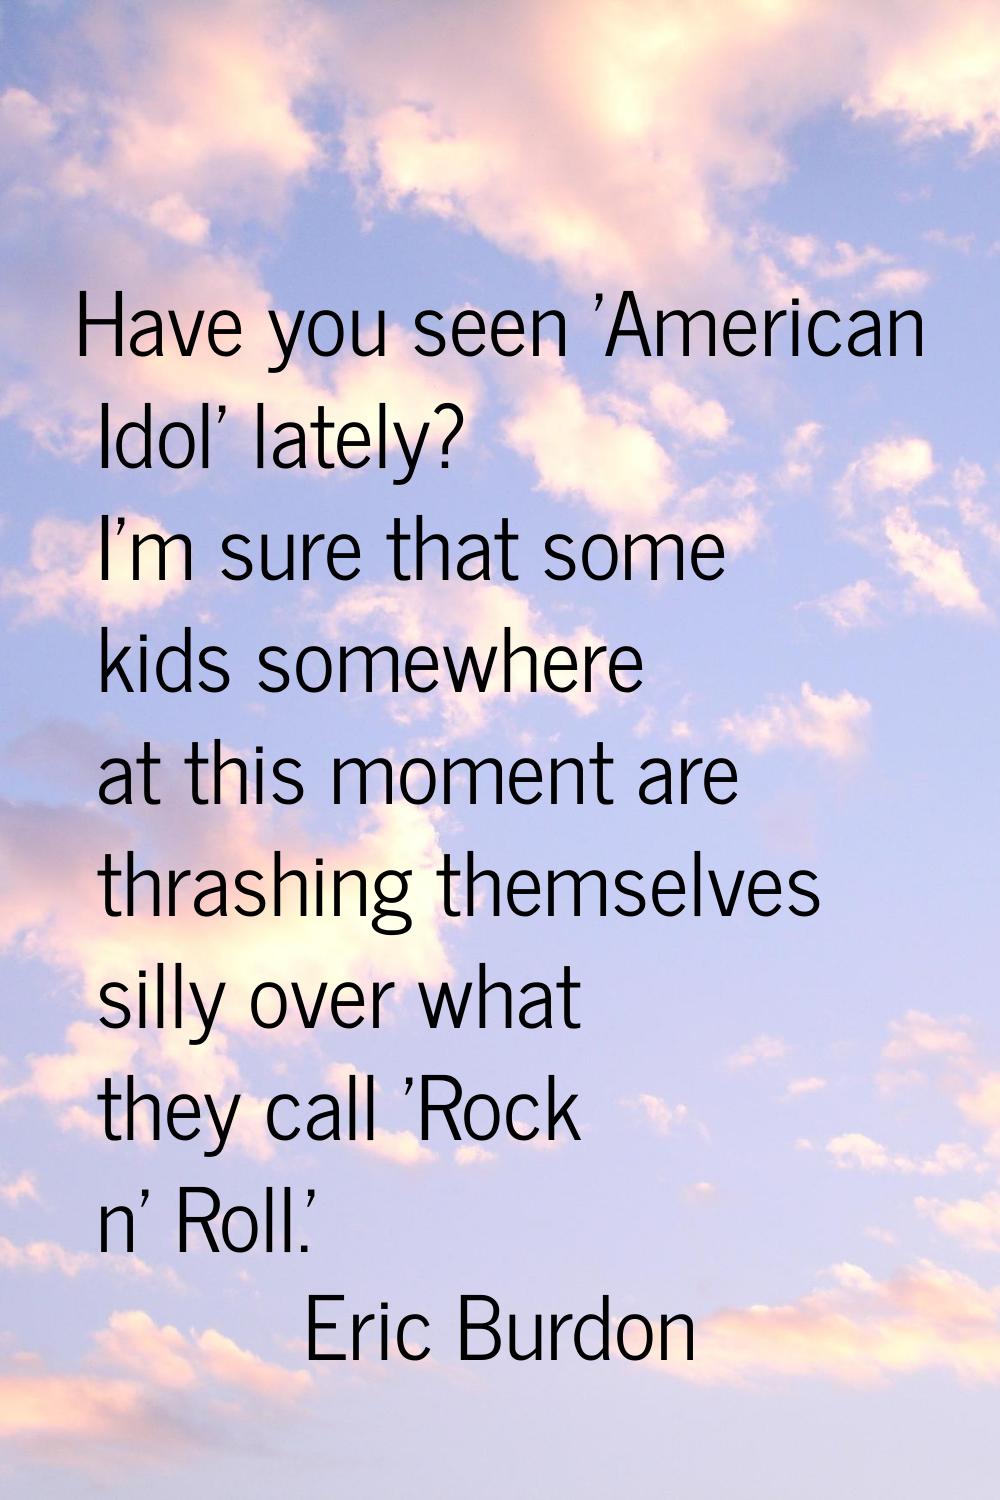 Have you seen 'American Idol' lately? I'm sure that some kids somewhere at this moment are thrashin